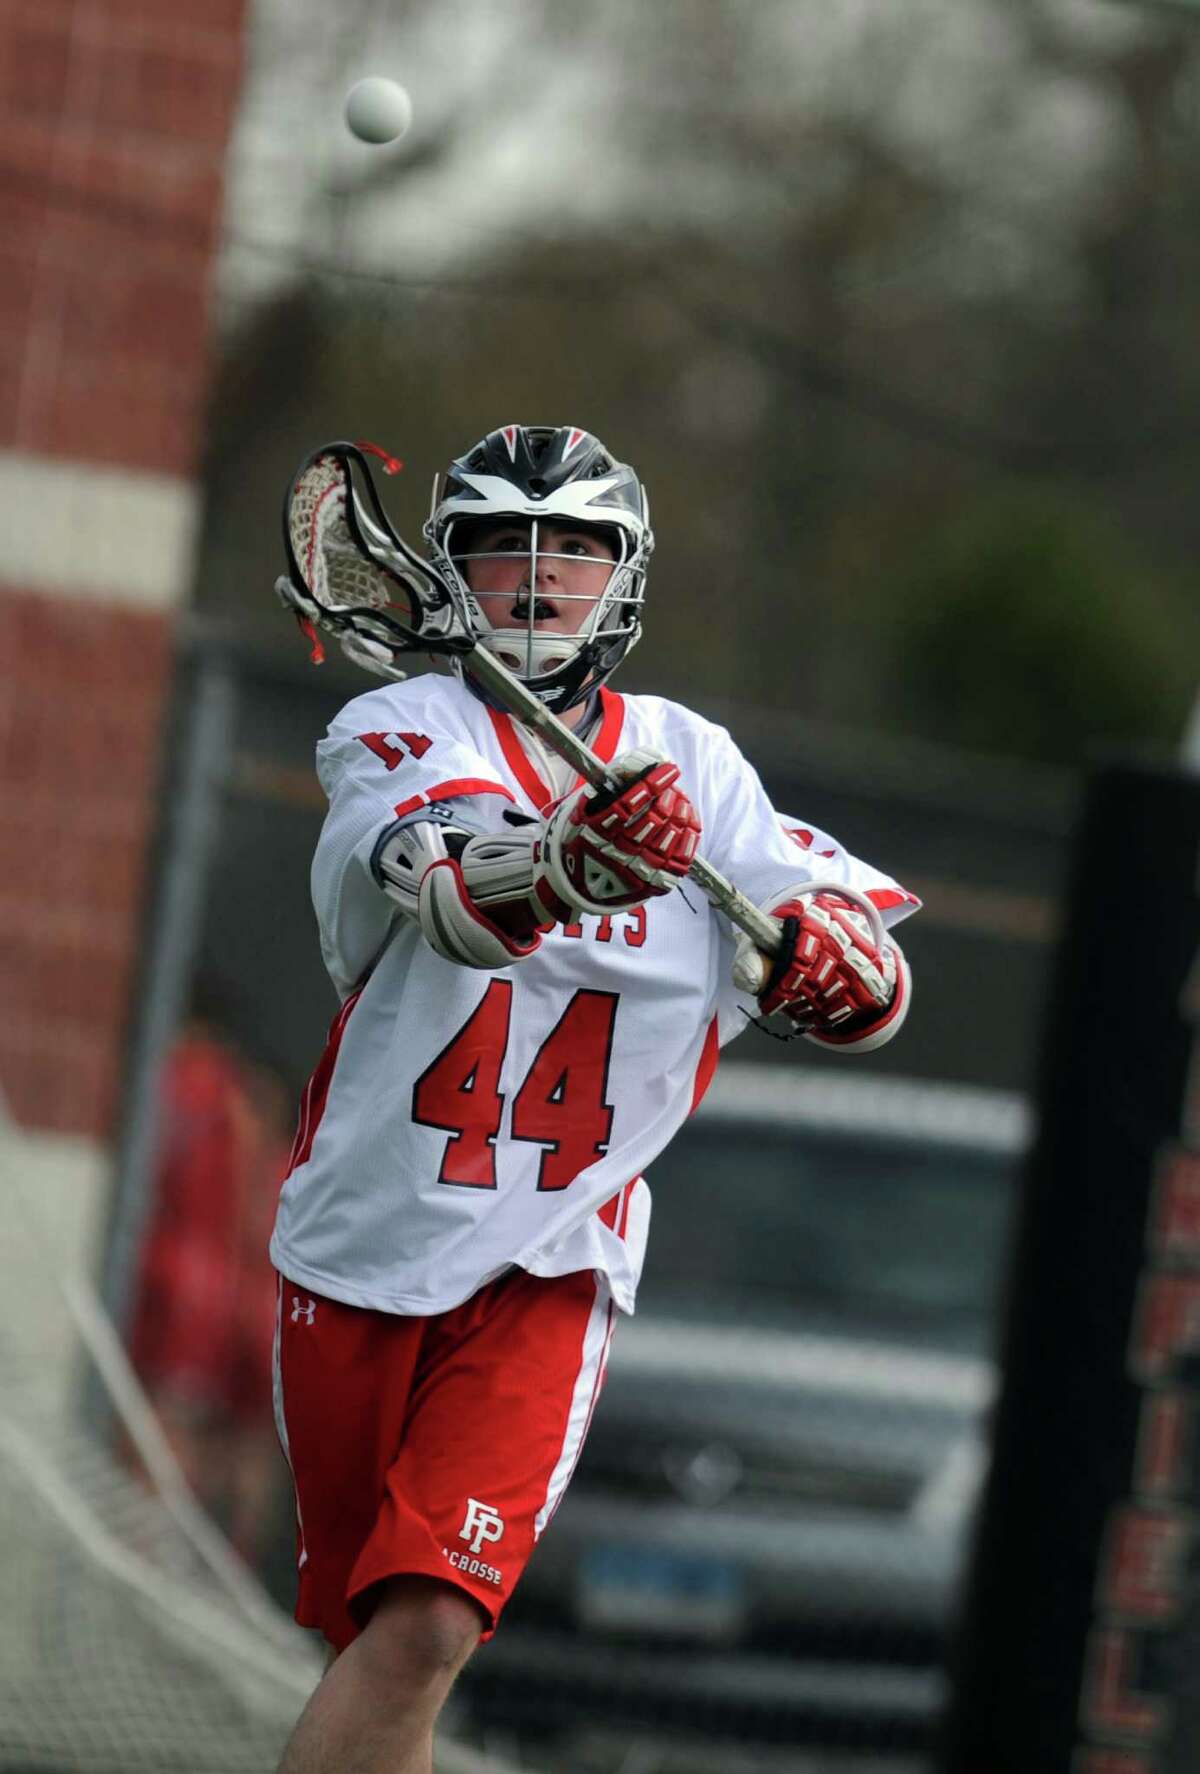 Fairfield Prep's Jack Arrix passes the ball during their match against Cheshire Tuesday, April 10, 2012 at Alumni Field on the campus of Fairfield University.